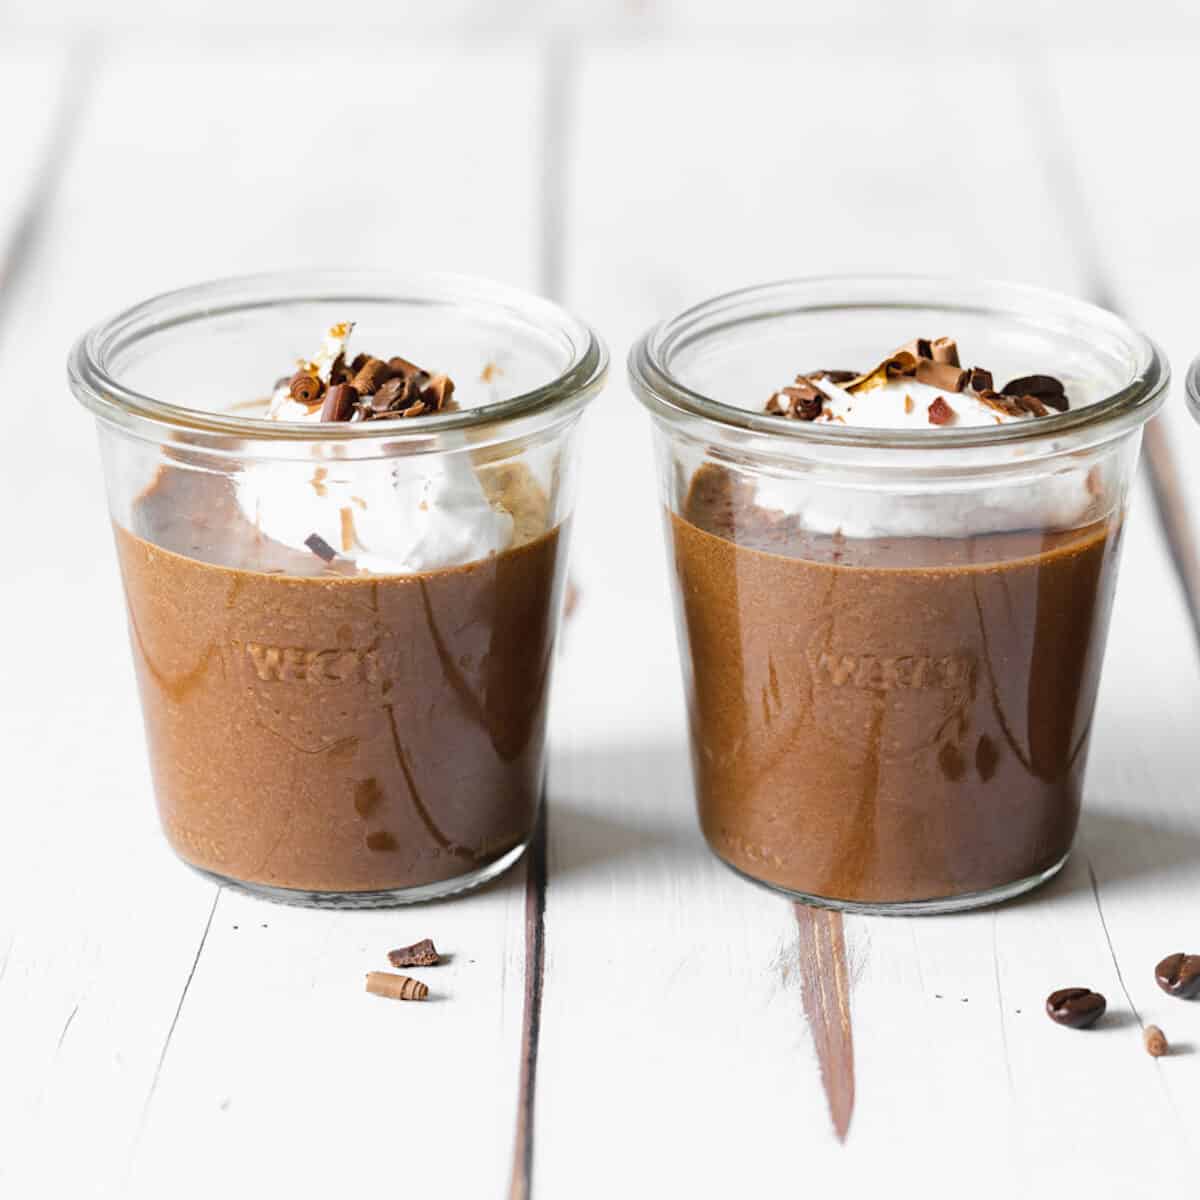 2 jars of chocolate mousse on a white wooden surface.